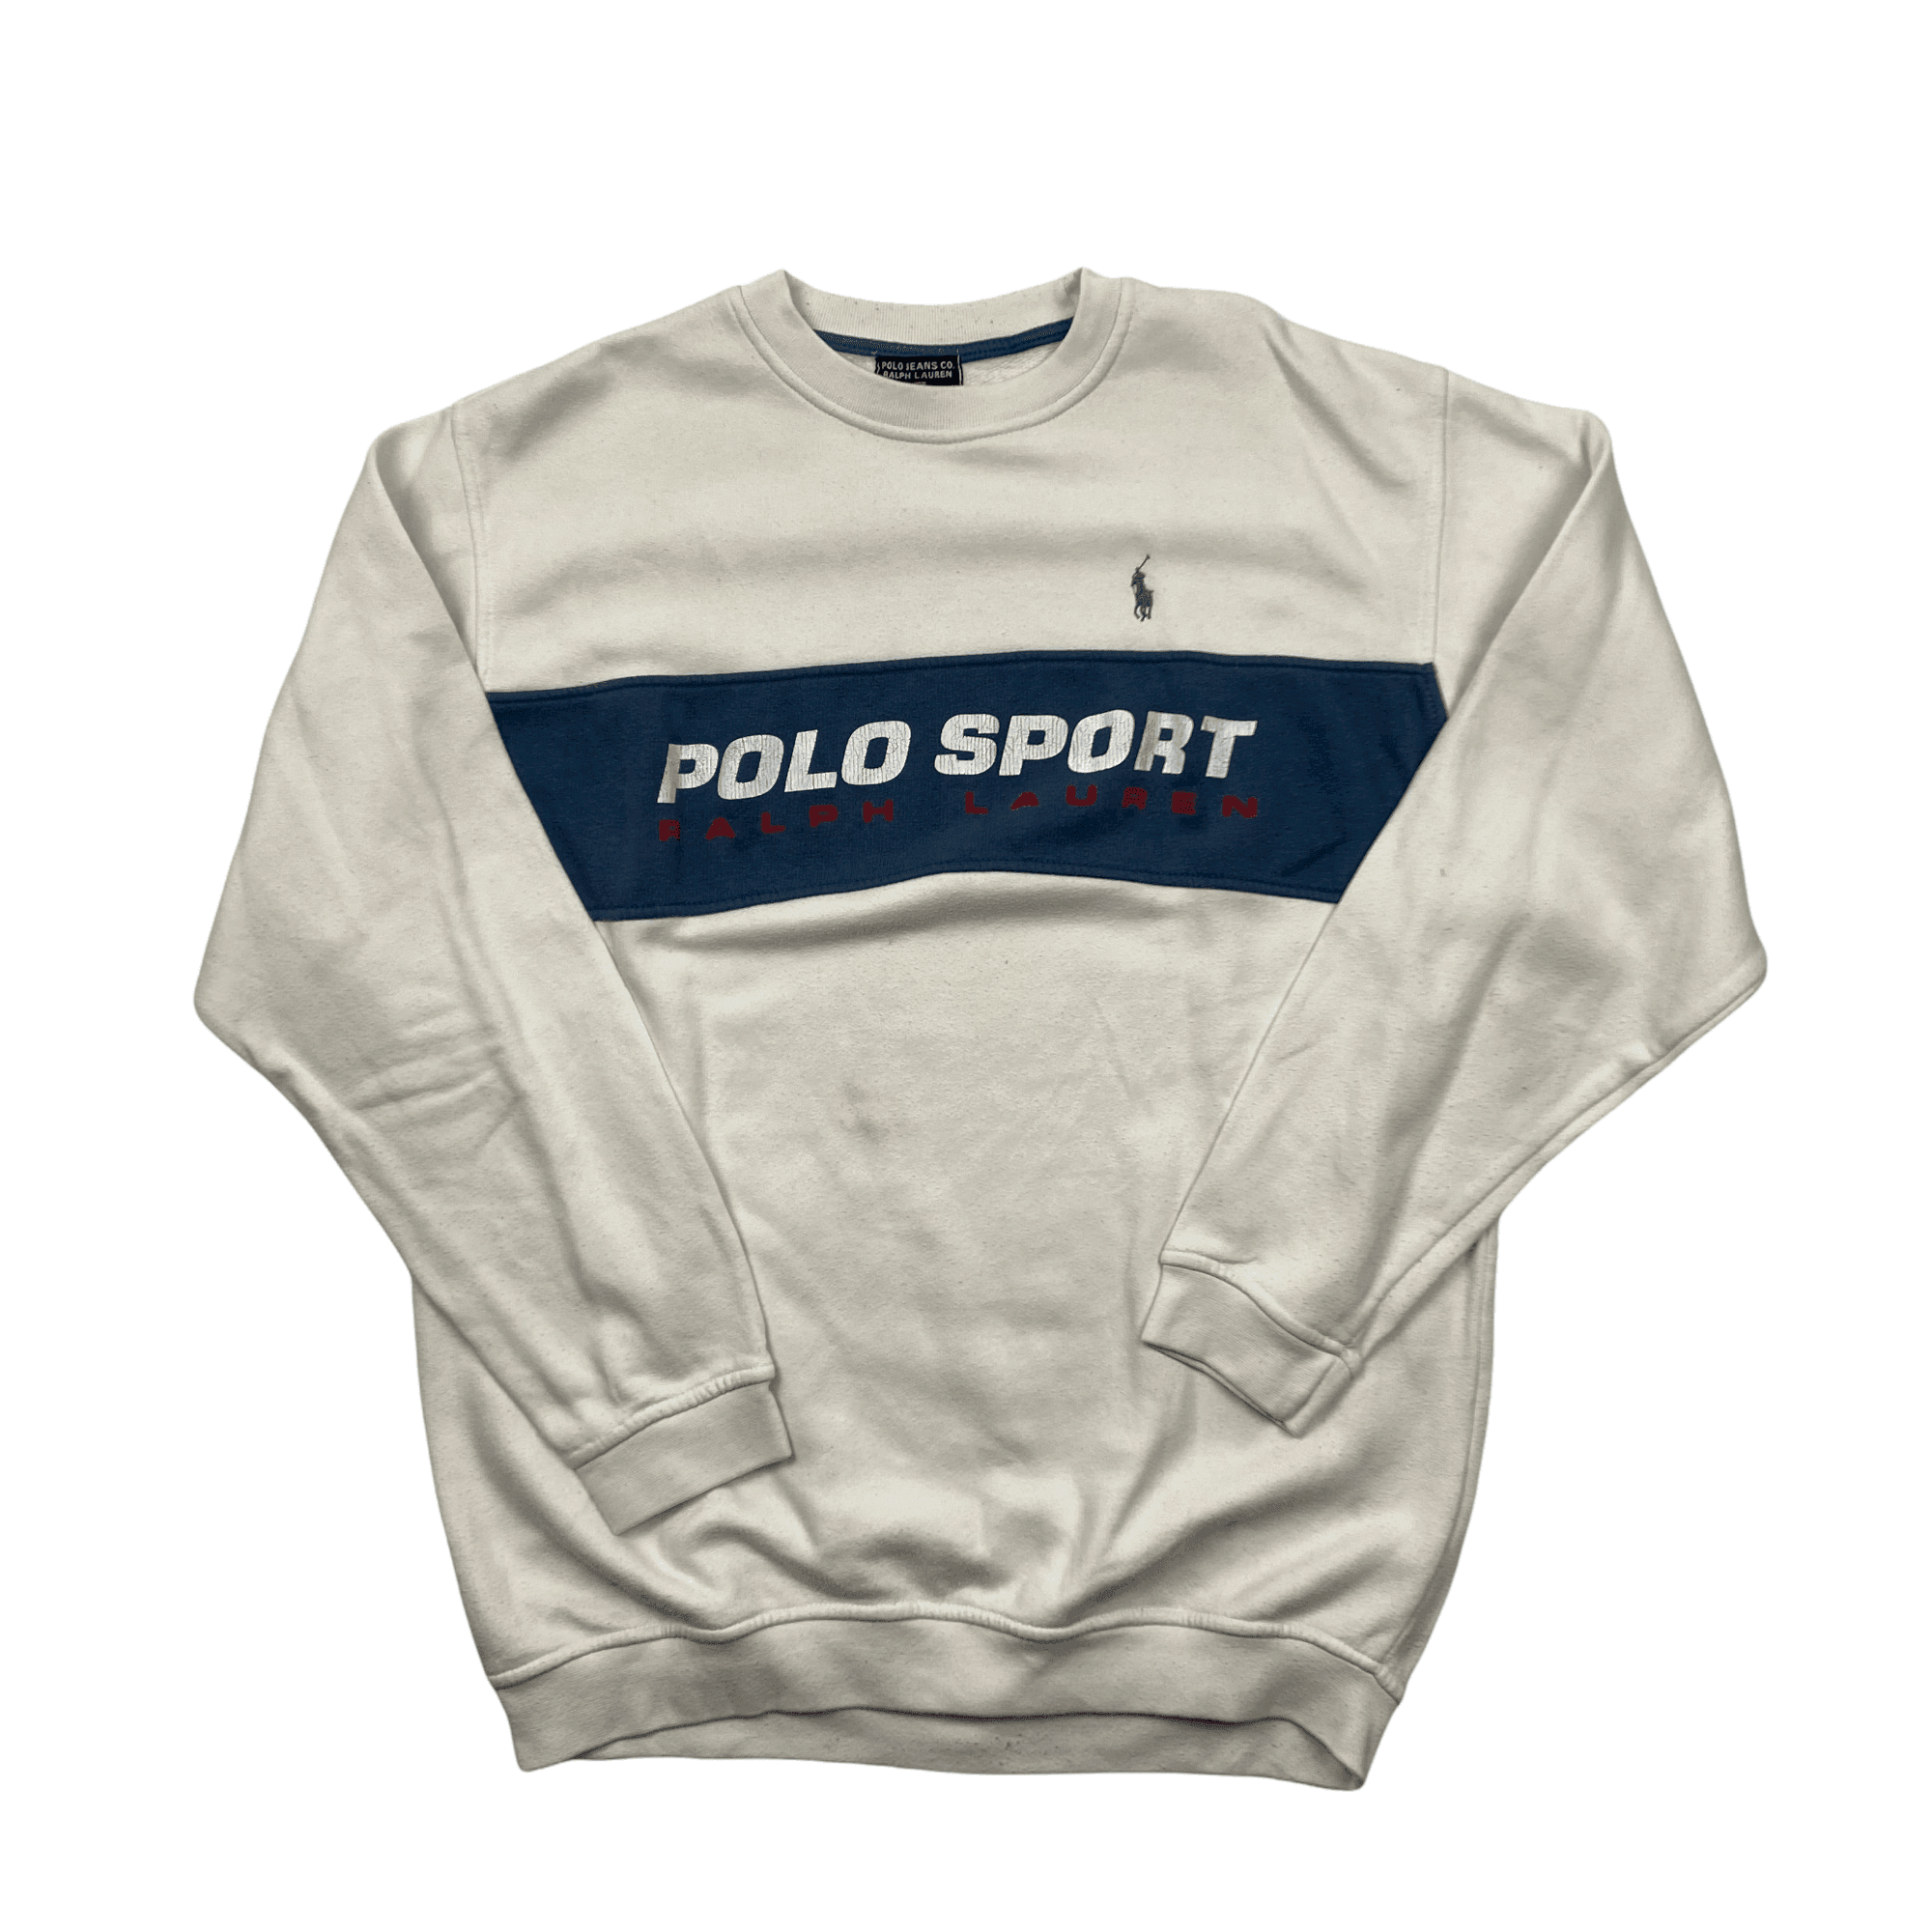 Vintage 90s White + Blue Ralph Lauren Polo Sport Spell-Out Sweatshirt - Extra Large (Recommended Size - Large) - The Streetwear Studio